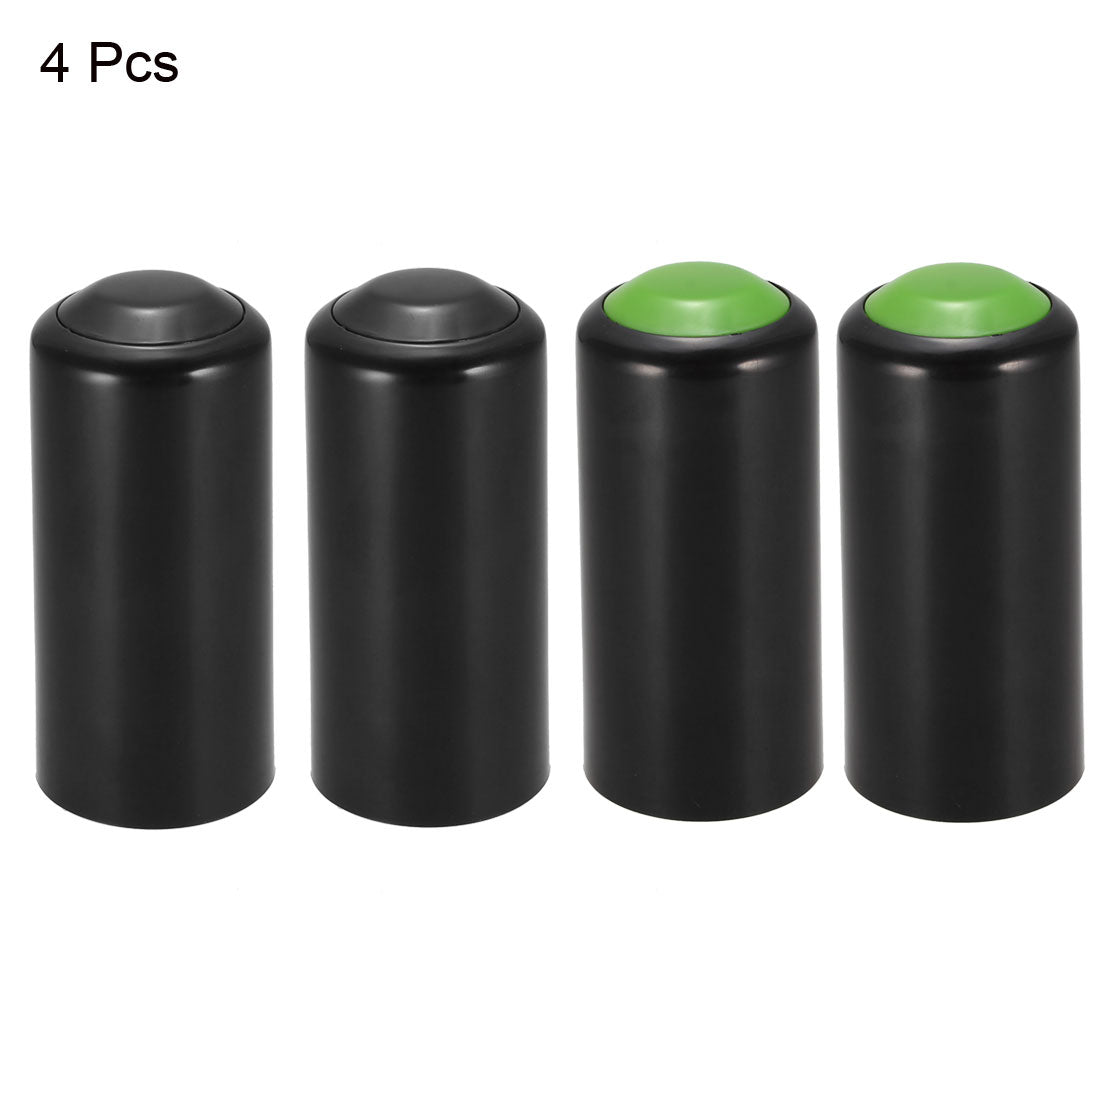 uxcell Uxcell Microphones Battery Cover Mic Battery Screw on Cap Cup Cover for PGX24 SLX24 PG58 SM58 BETA58 Wireless Green Black 4Pcs